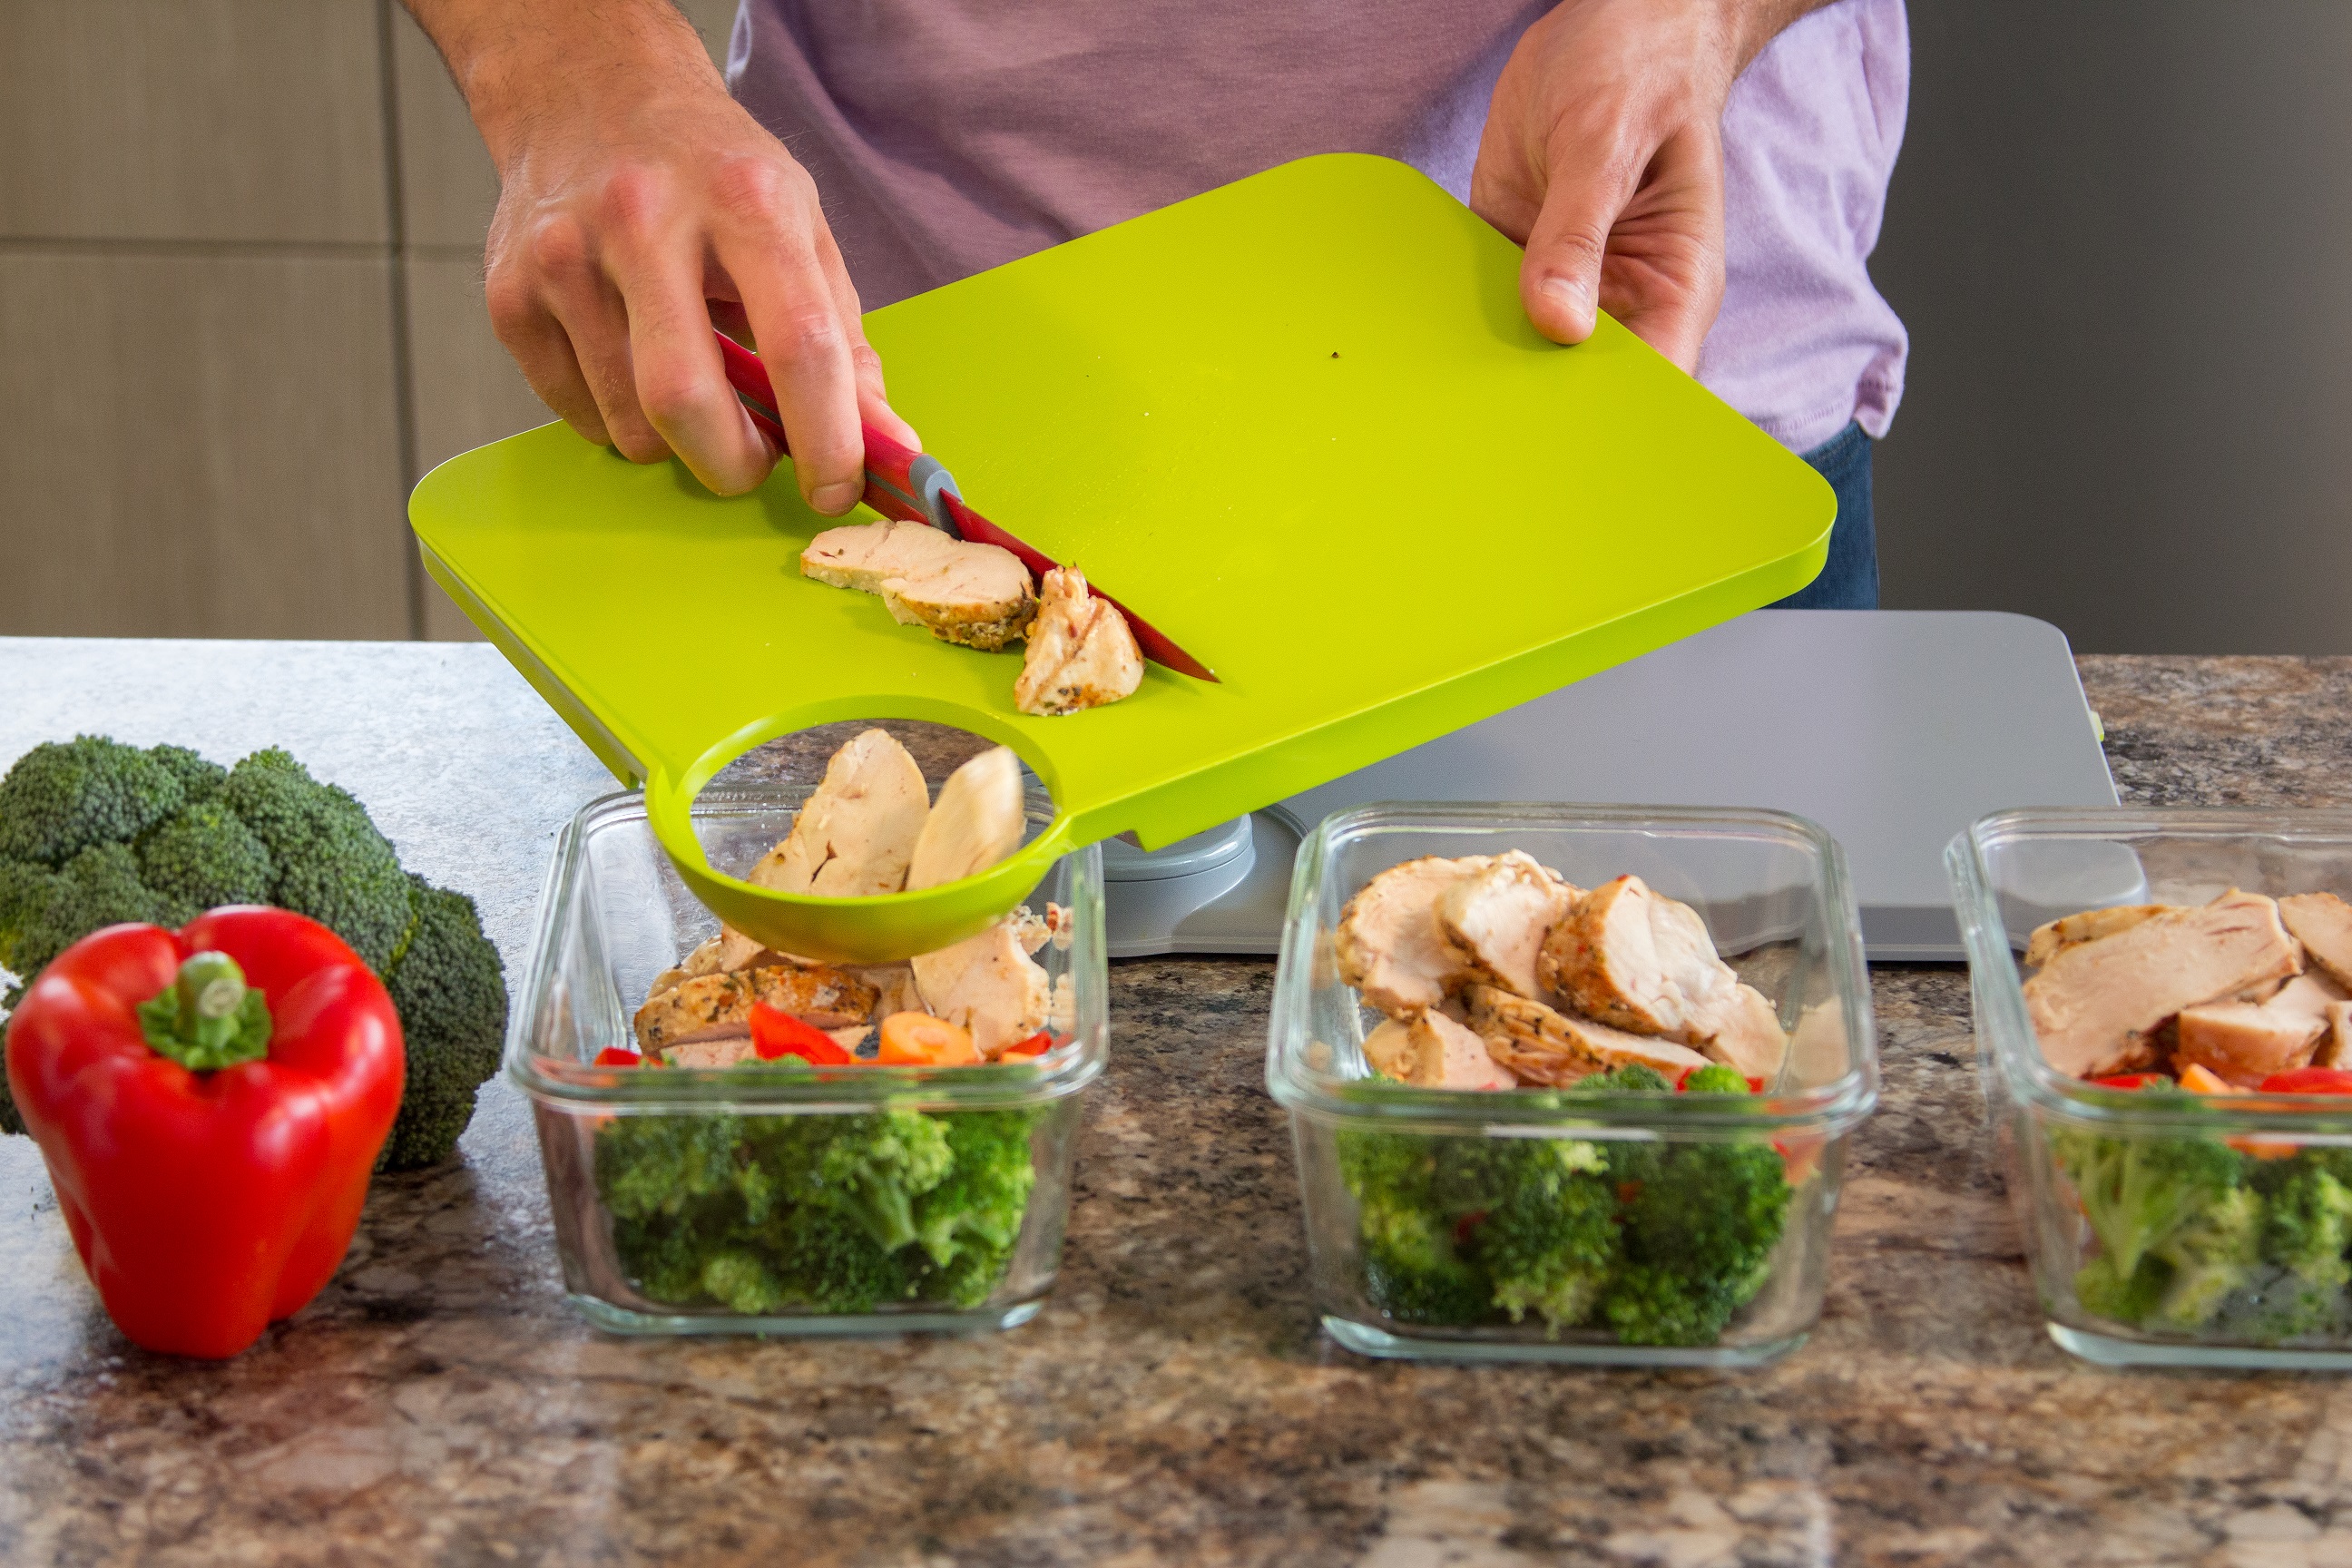 Weigh, portion, serve, and dispense food, all on the same board.